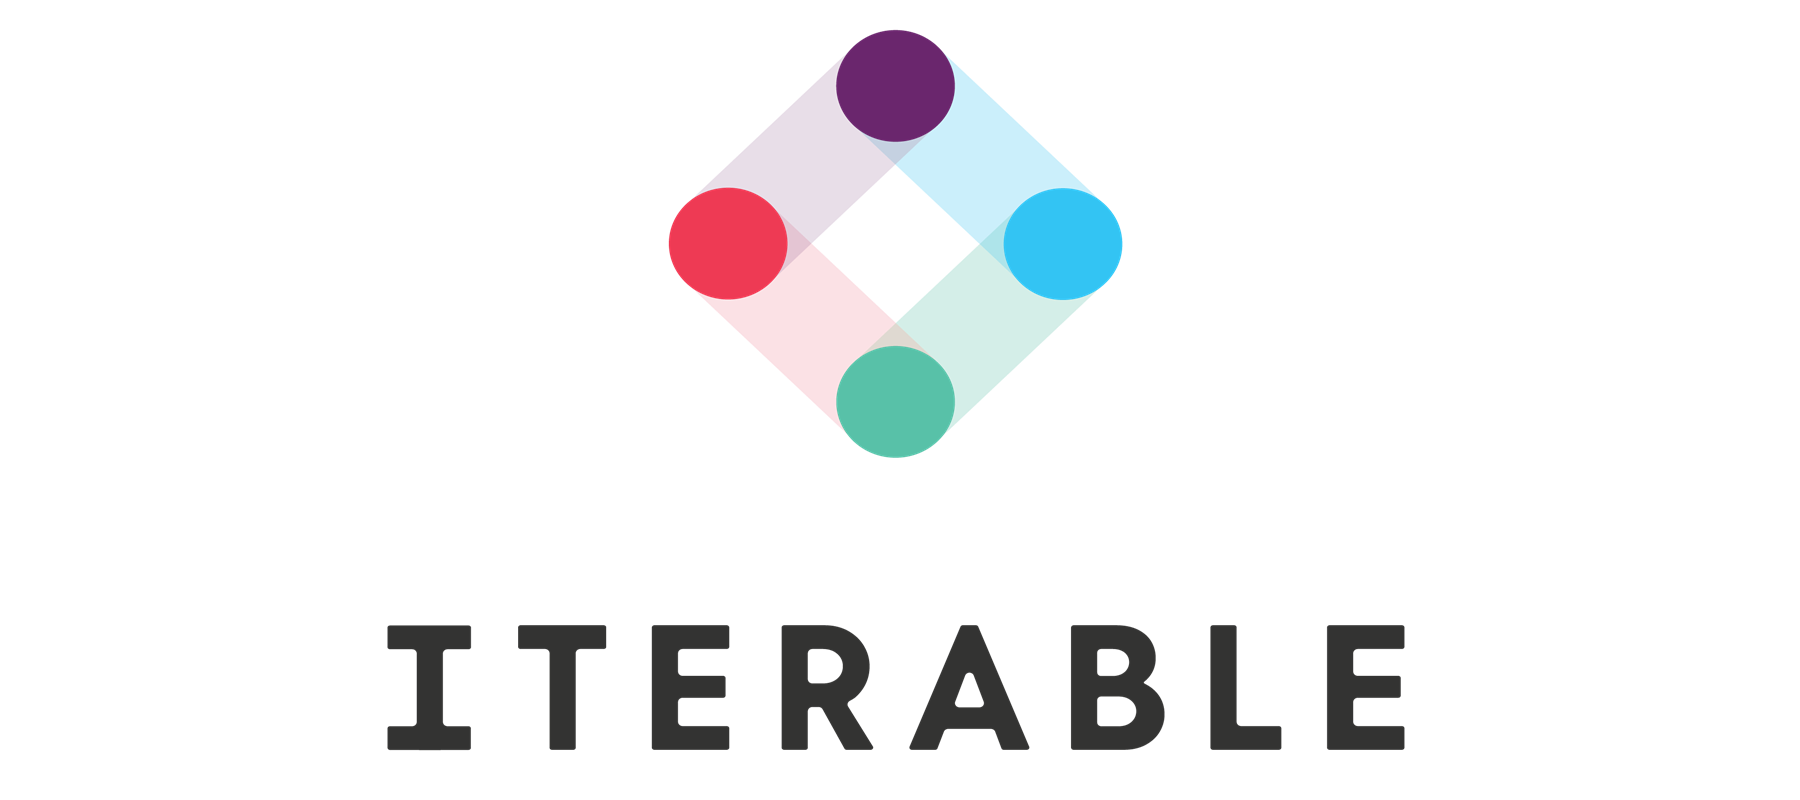 Iterable unveils advanced data management capabilities made for marketers